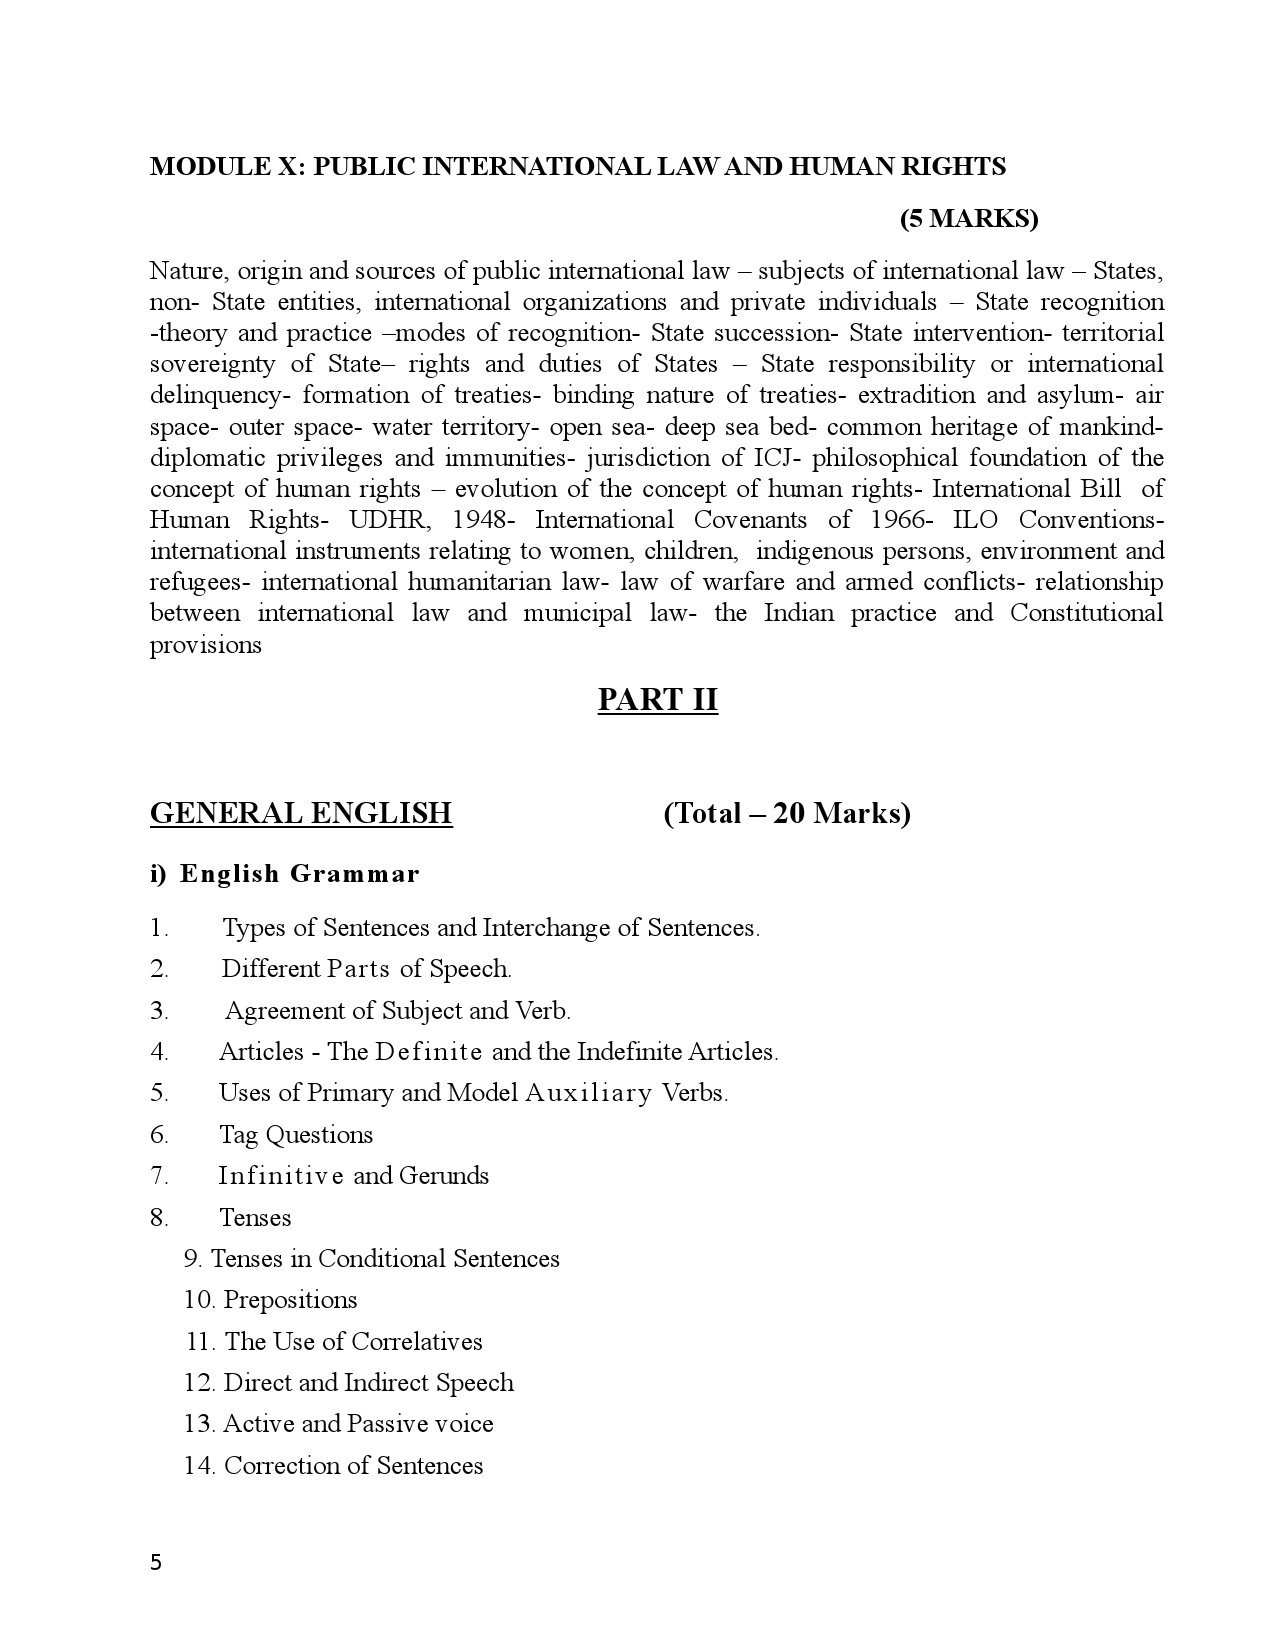 KPSC SYLLABUS FOR THE POST OF LEGAL ASSISTANT GRADE II - Notification Image 5